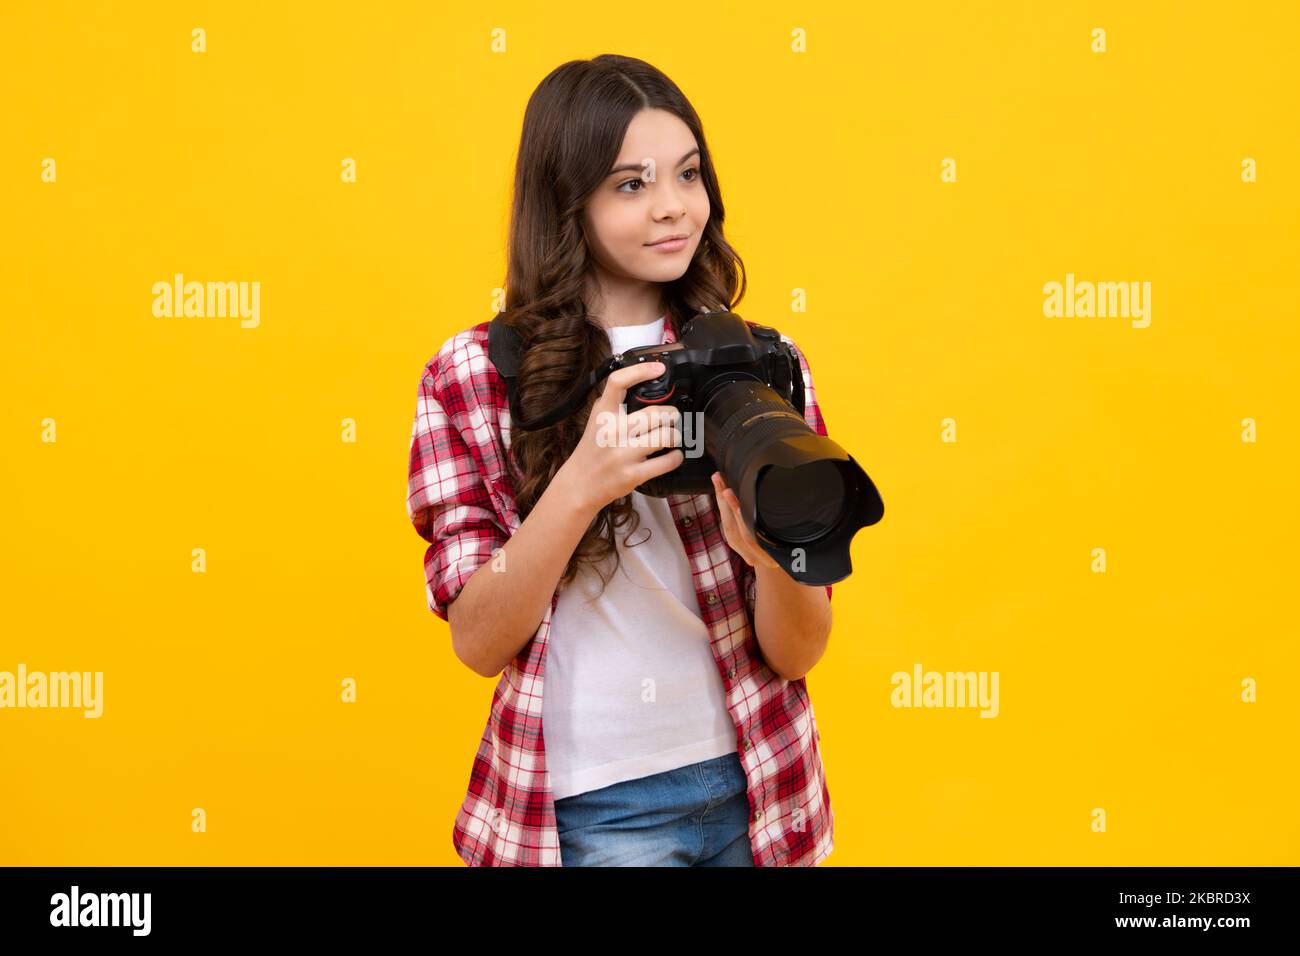 12, 13, 14 year old teen girl holding digital camera or DSLR over yellow background. Stock Photo